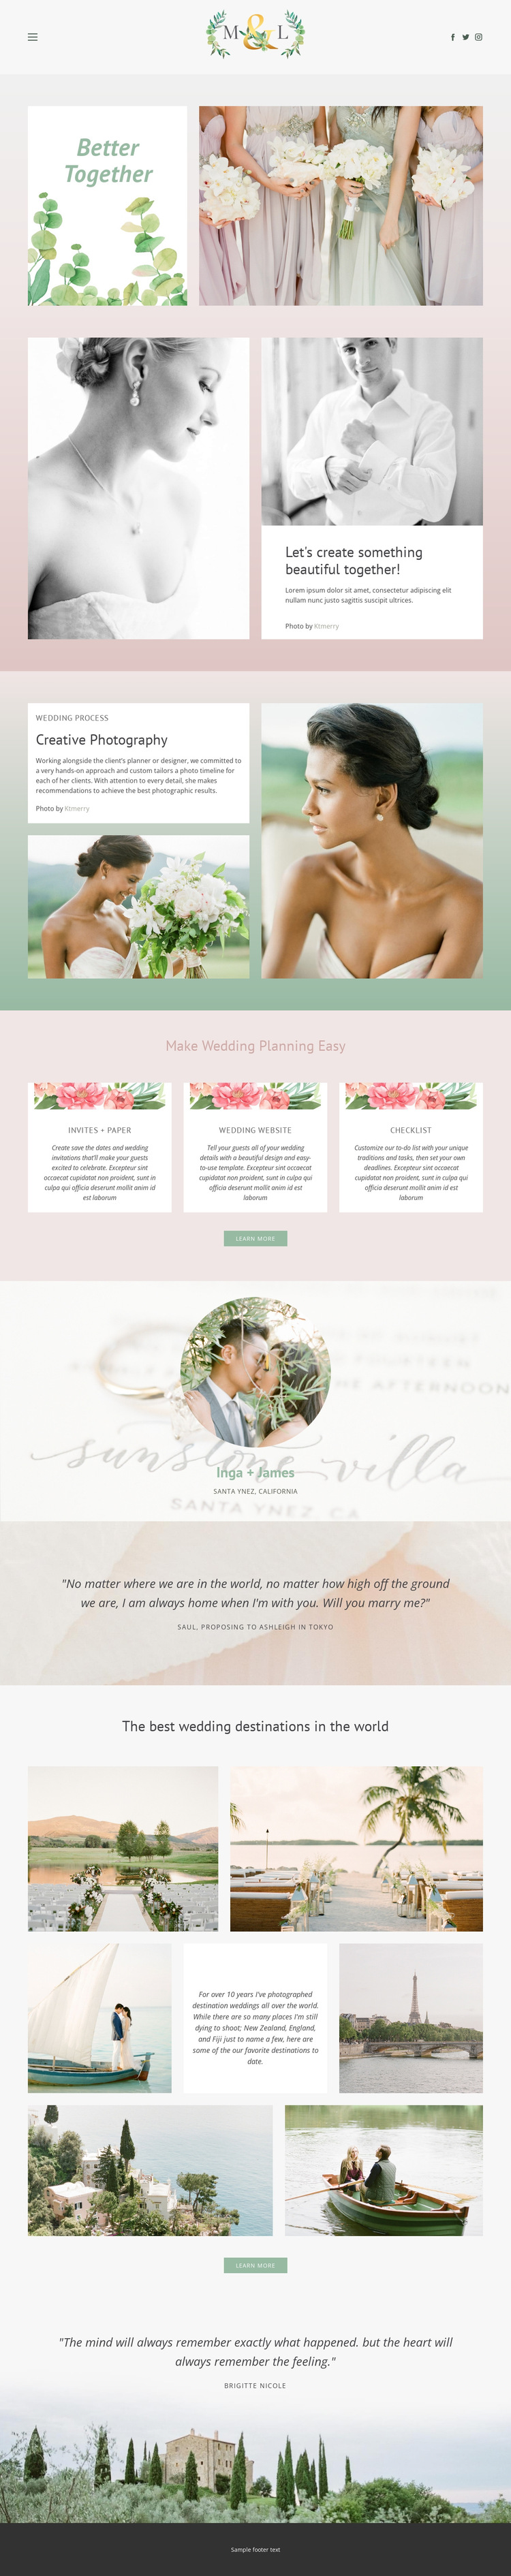 Best photos for wedding HTML5 Template